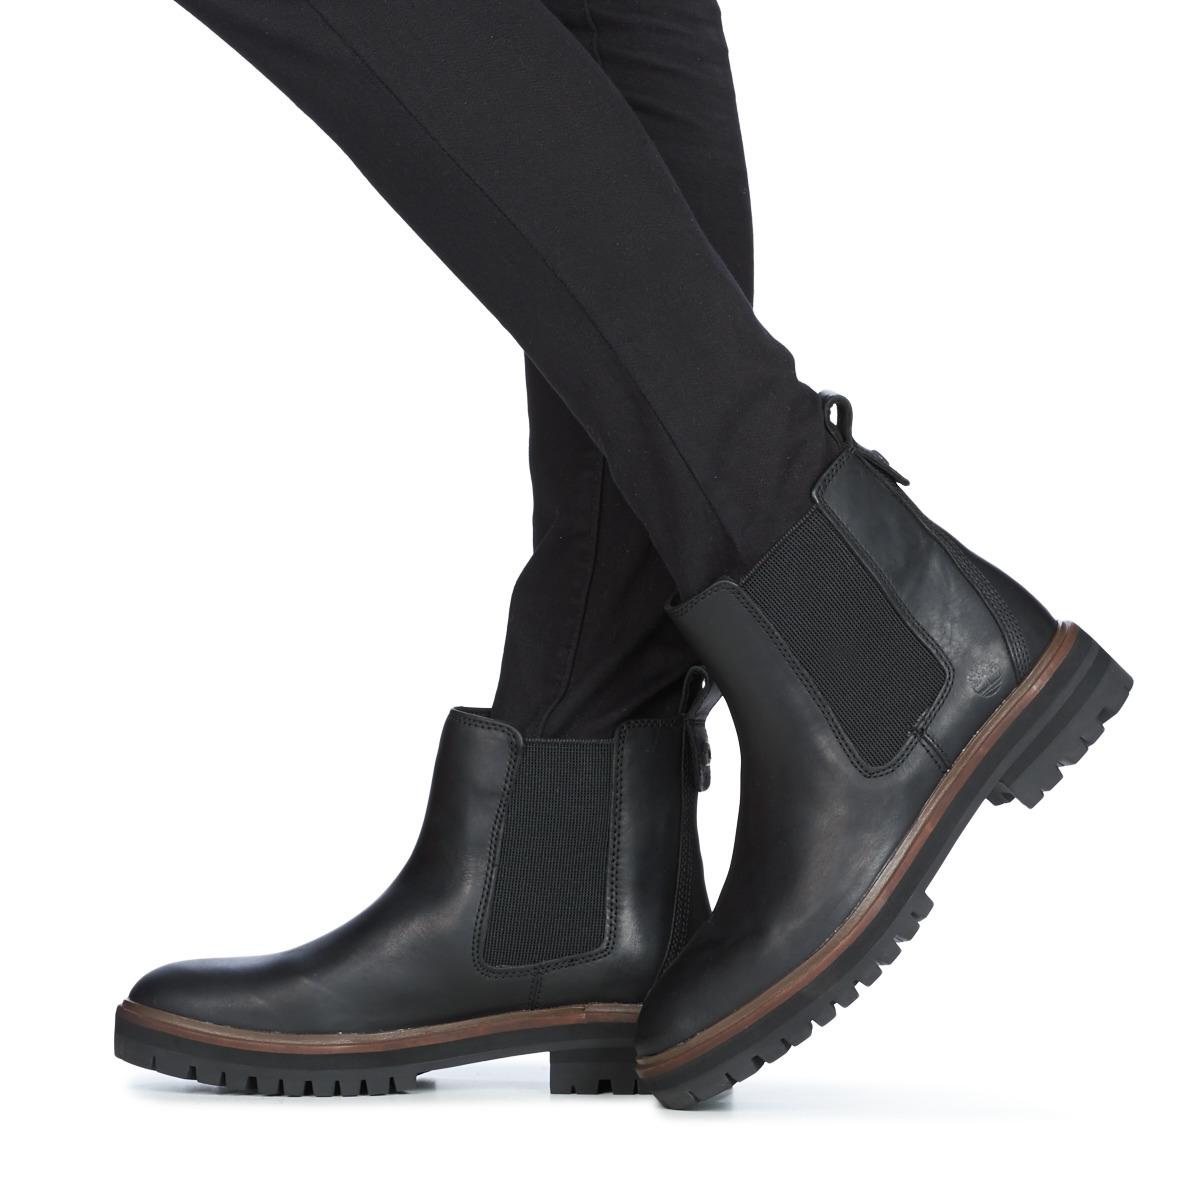 timberland london square chelsea boots black